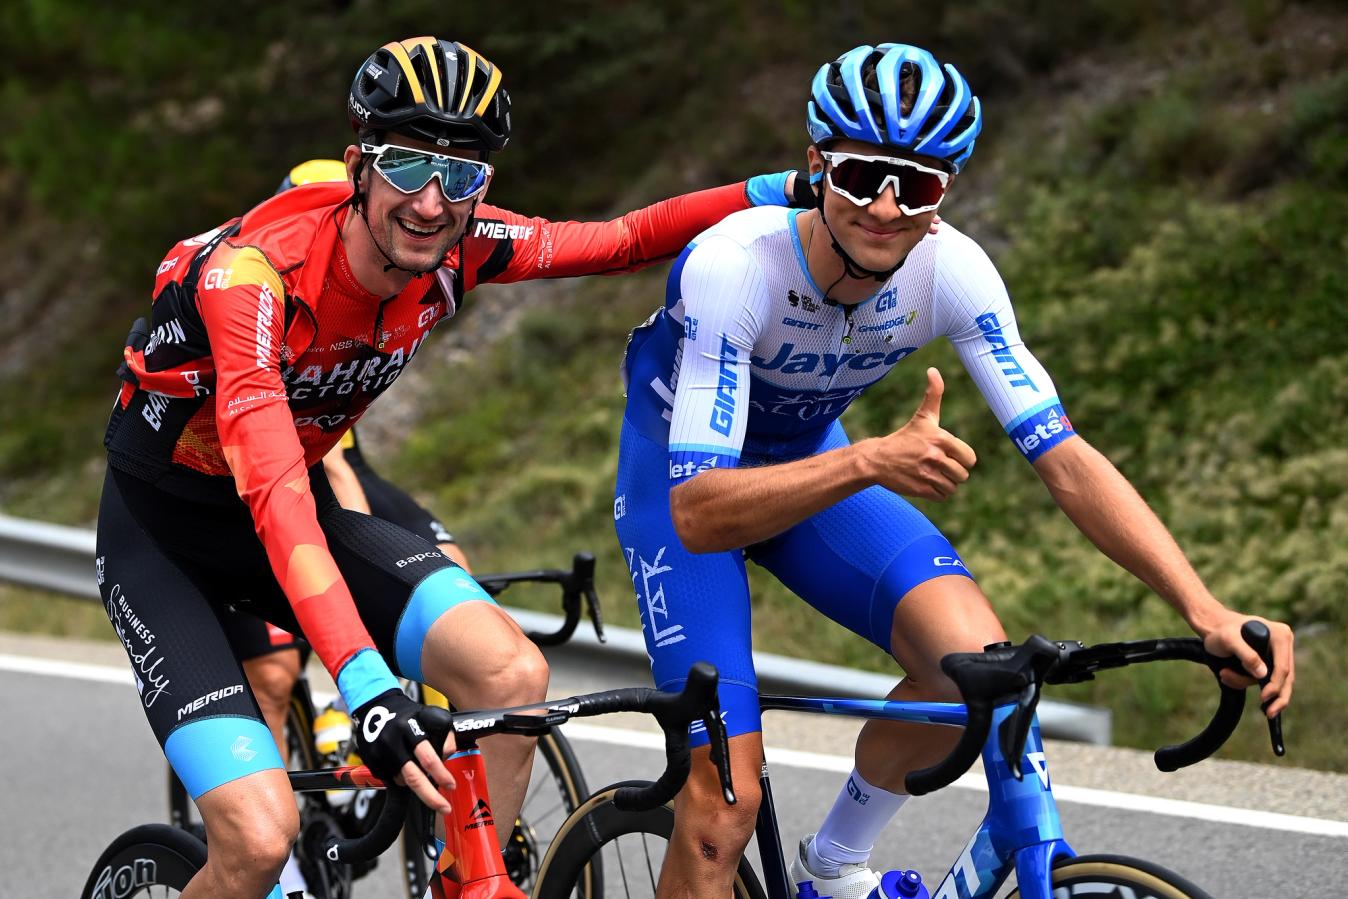 Jan Maas and Wout Poels sharing a positive moment during the Vuelta a España